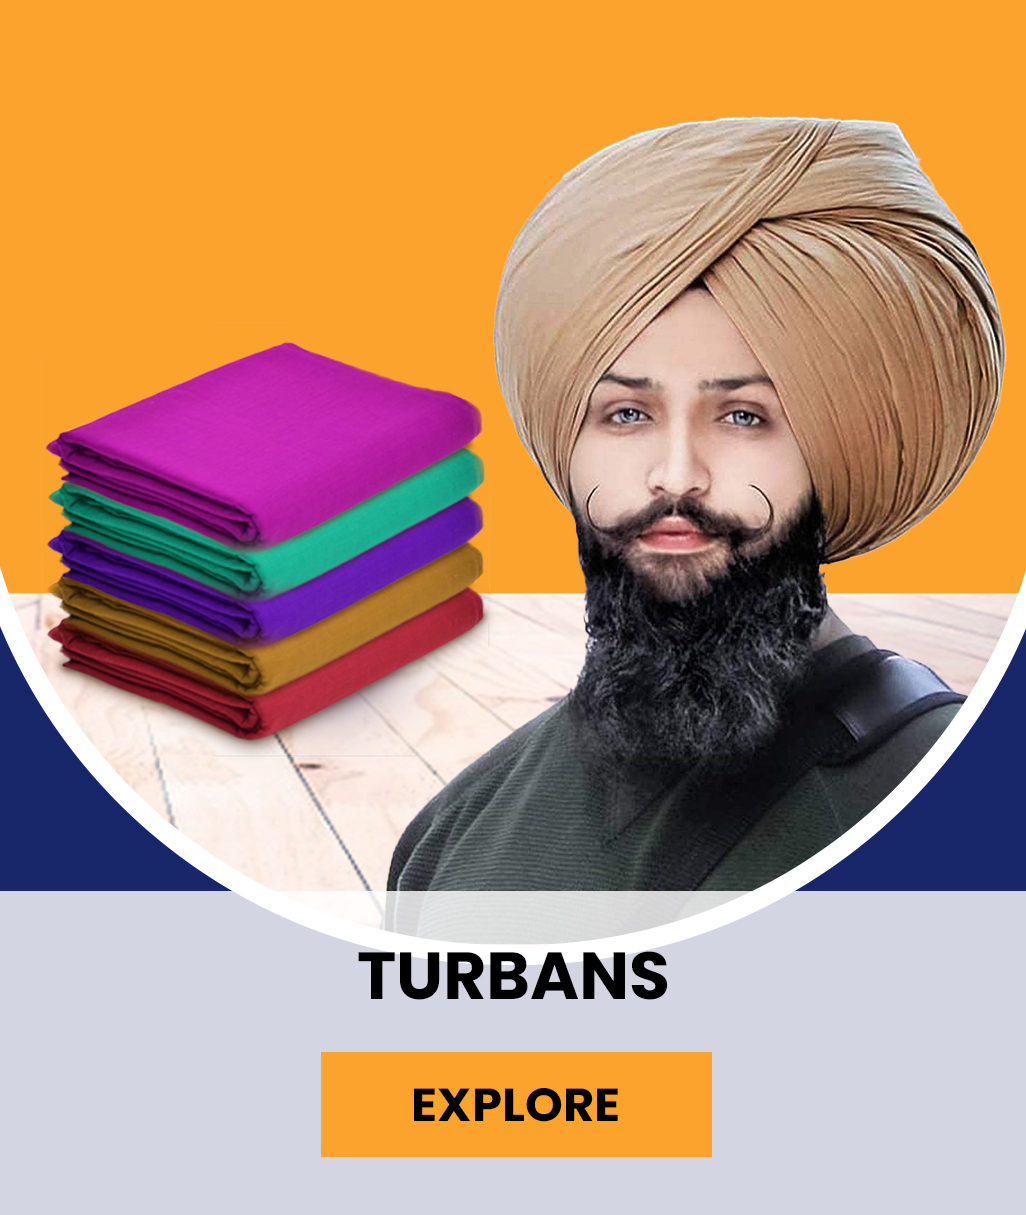 Why does every Sikh Tie a Turban?